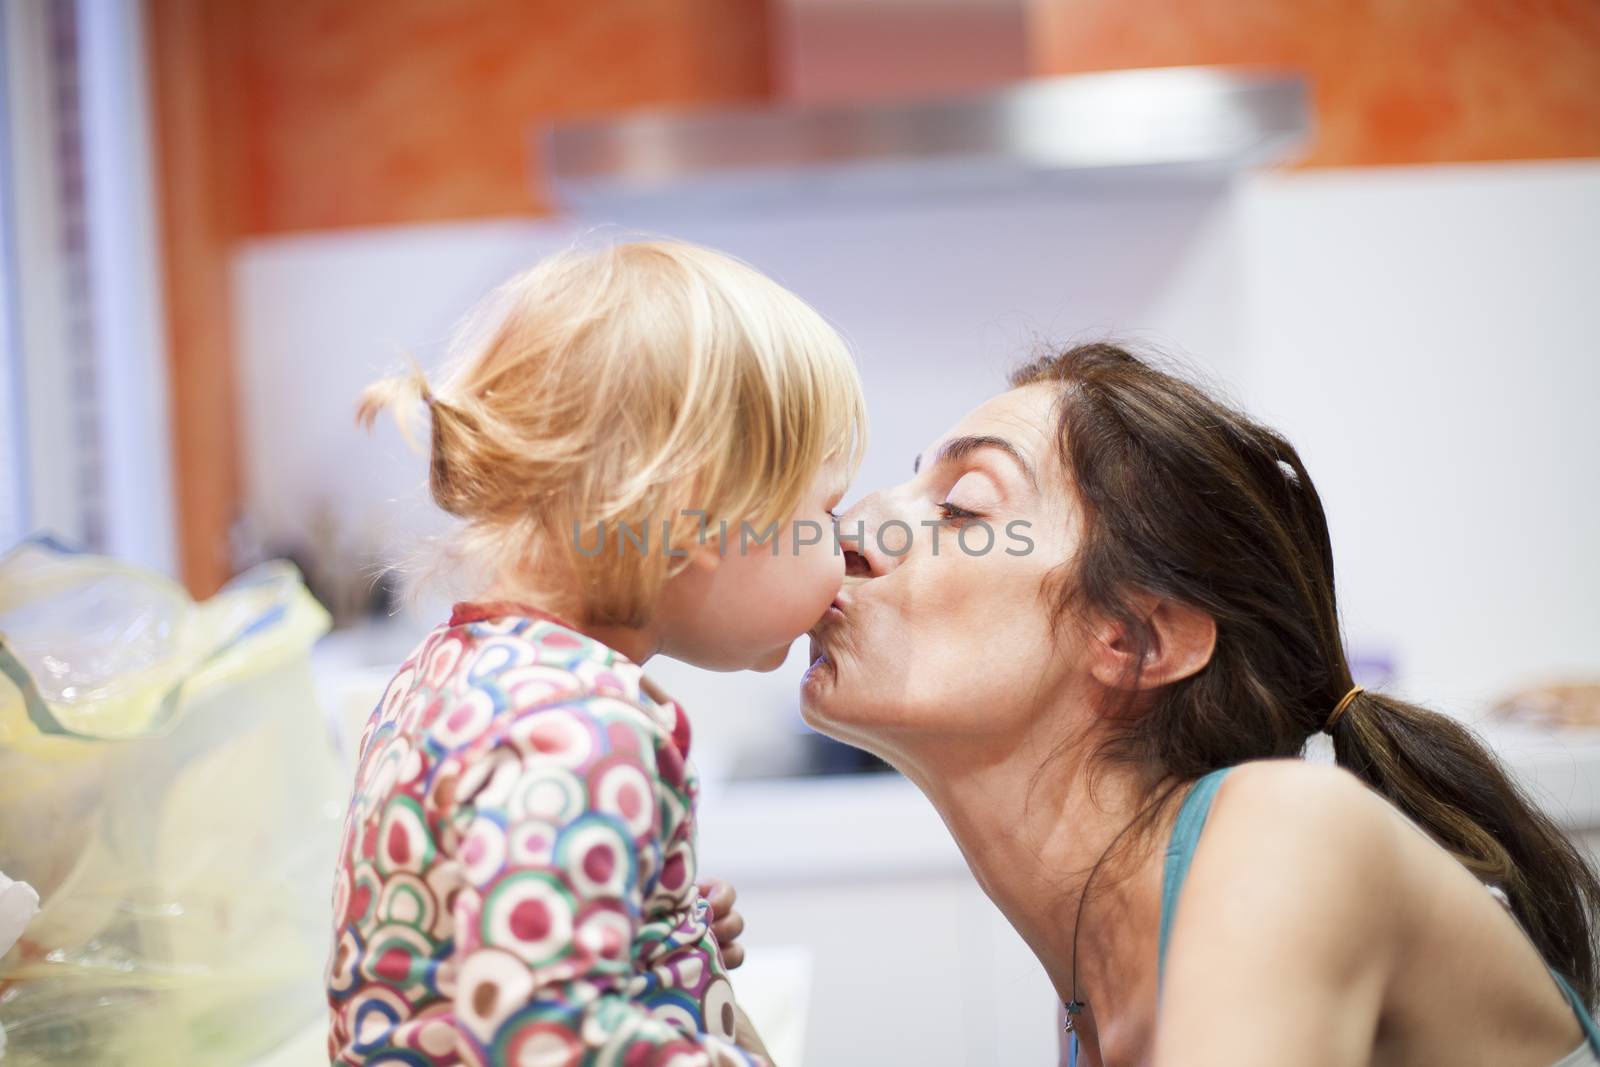 nineteen month aged blonde baby colored shirt with pigtails and brunette woman mother kissing in mouth in orange kitchen